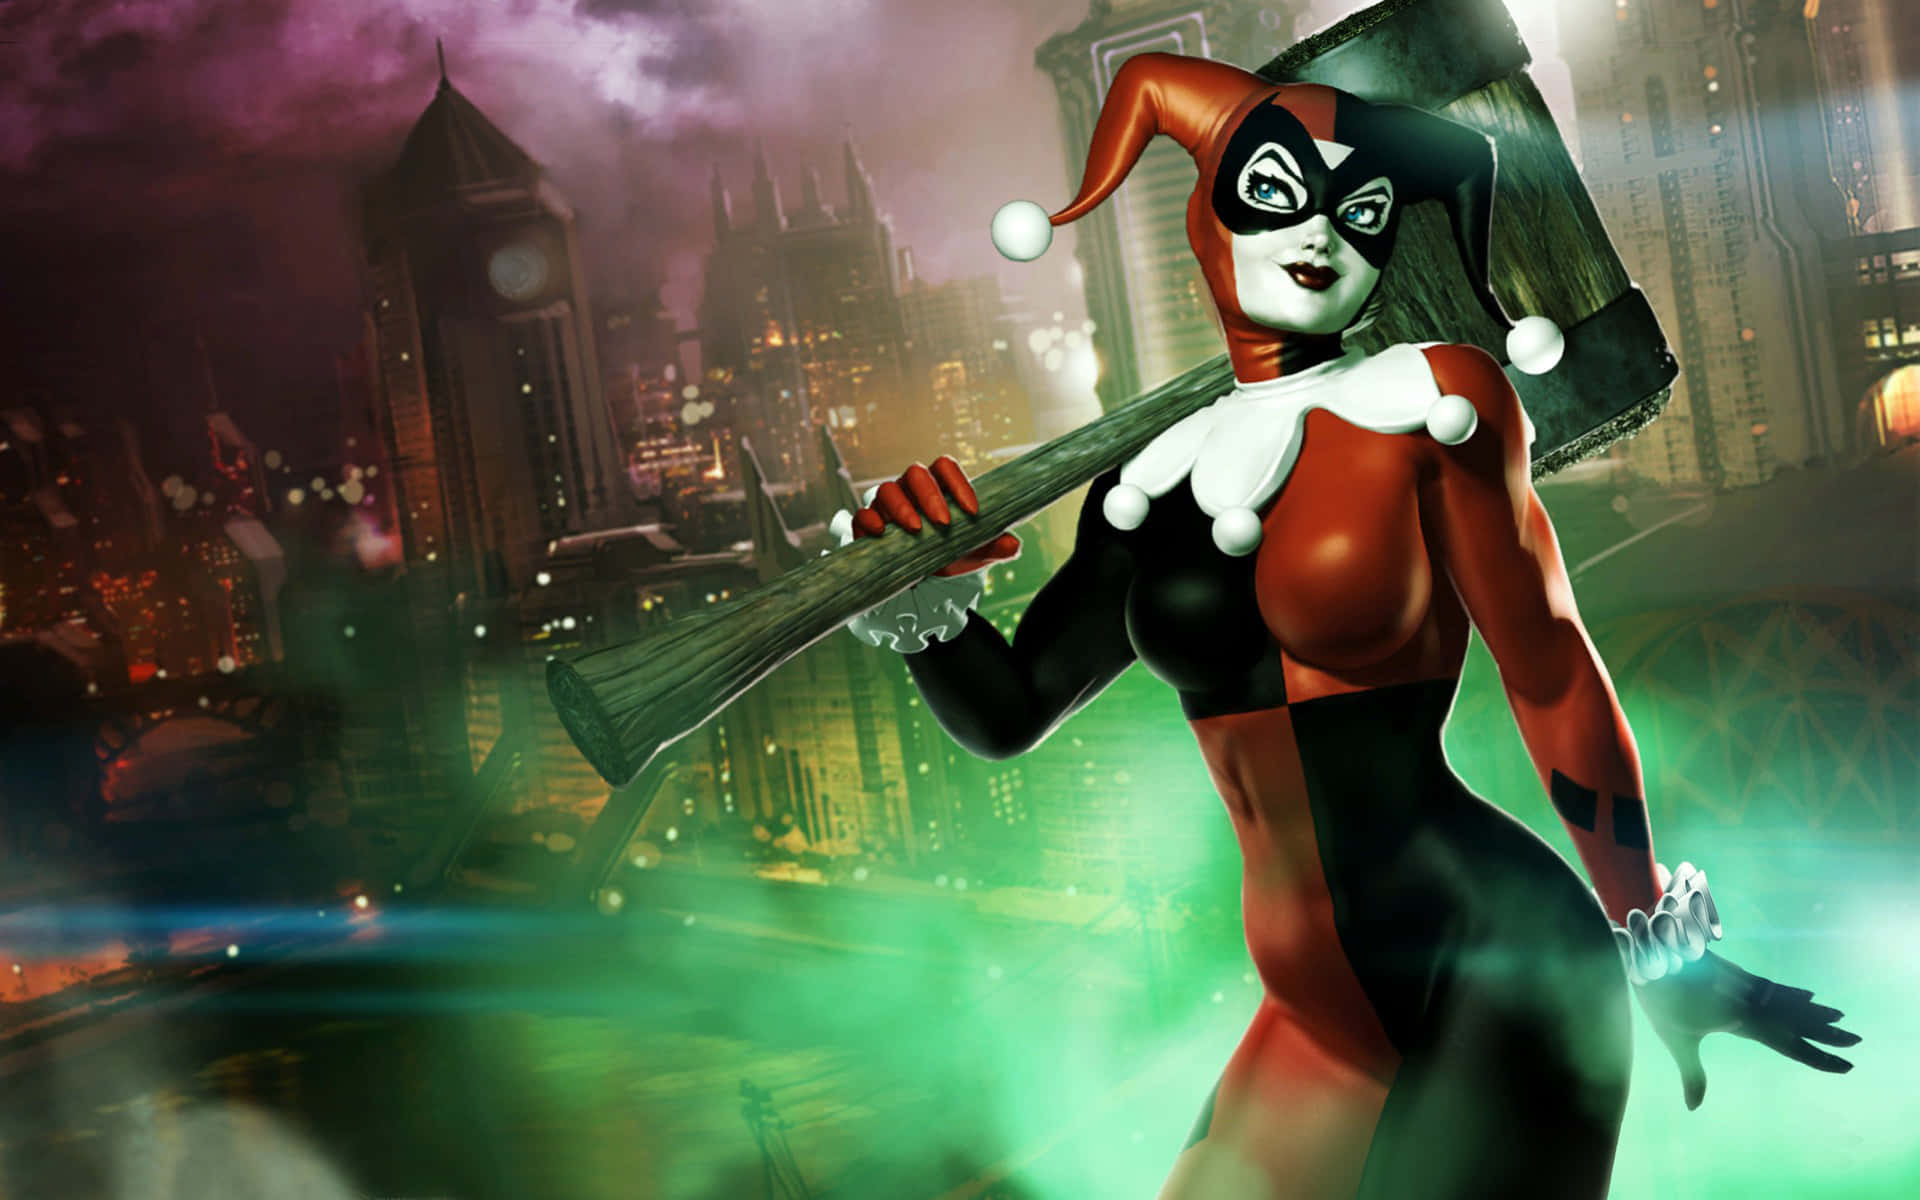 The Powerful Harley Quinn with Her Iconic Hammer Wallpaper